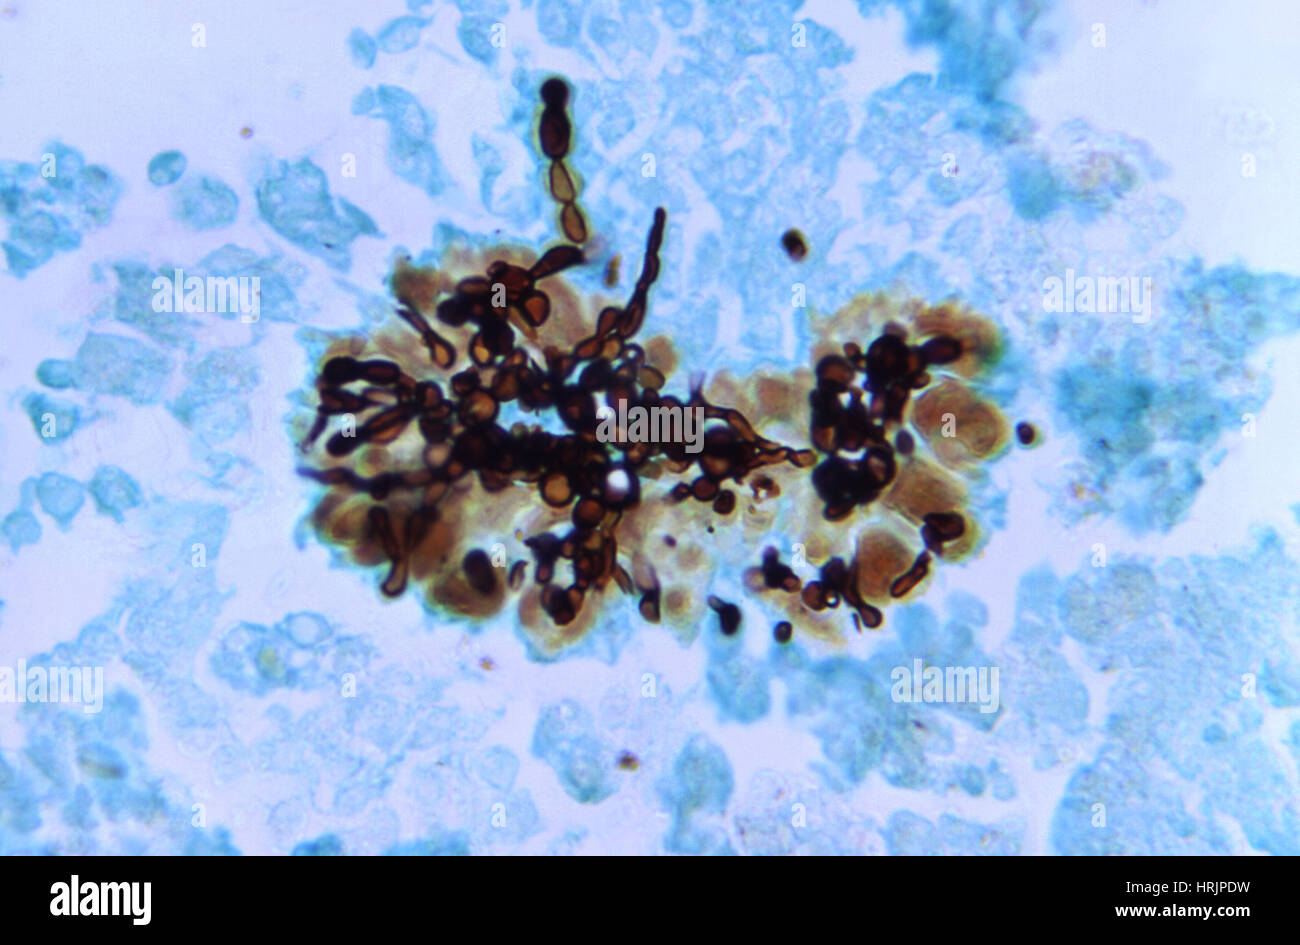 Candida albicans, Fungal Infection, LM Stock Photo